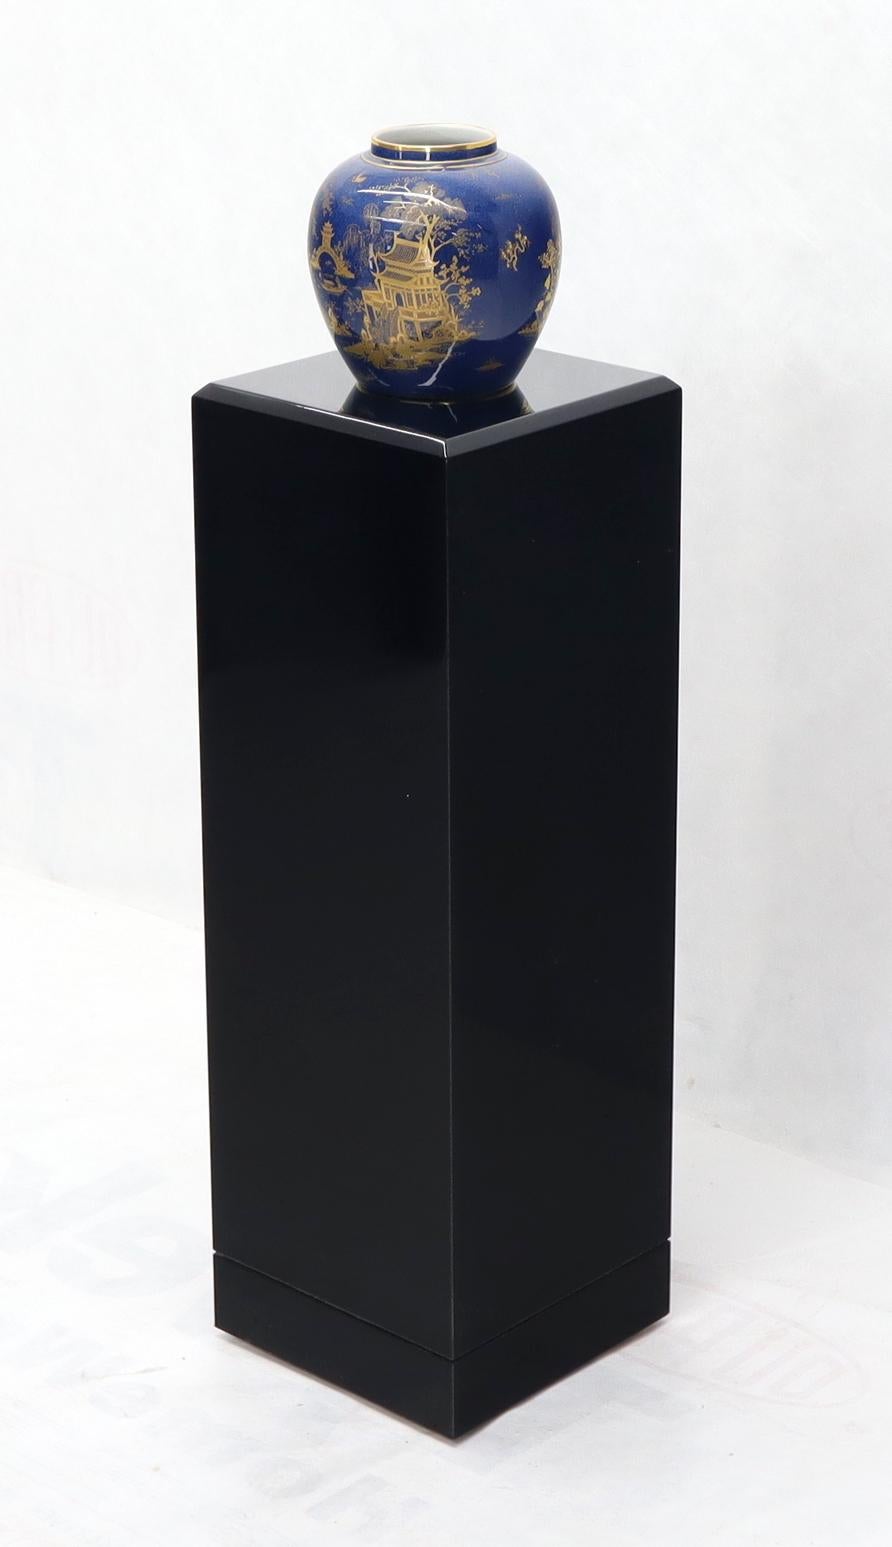 Square Black Onyx Lacquer Beveled Edge Tall Pedestal Stand In Good Condition For Sale In Rockaway, NJ